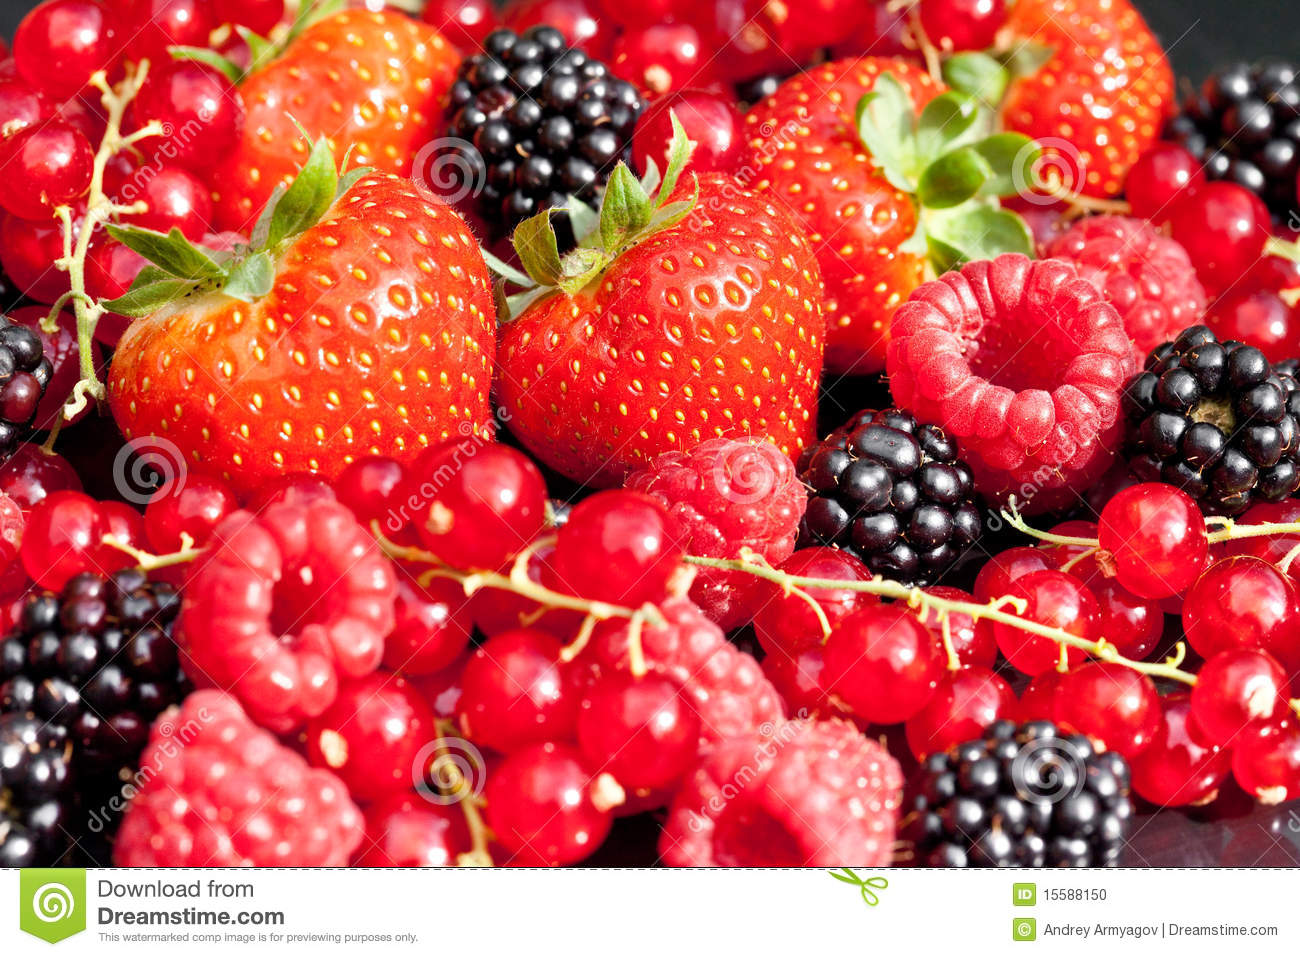 Amazing Berry's Pictures & Backgrounds